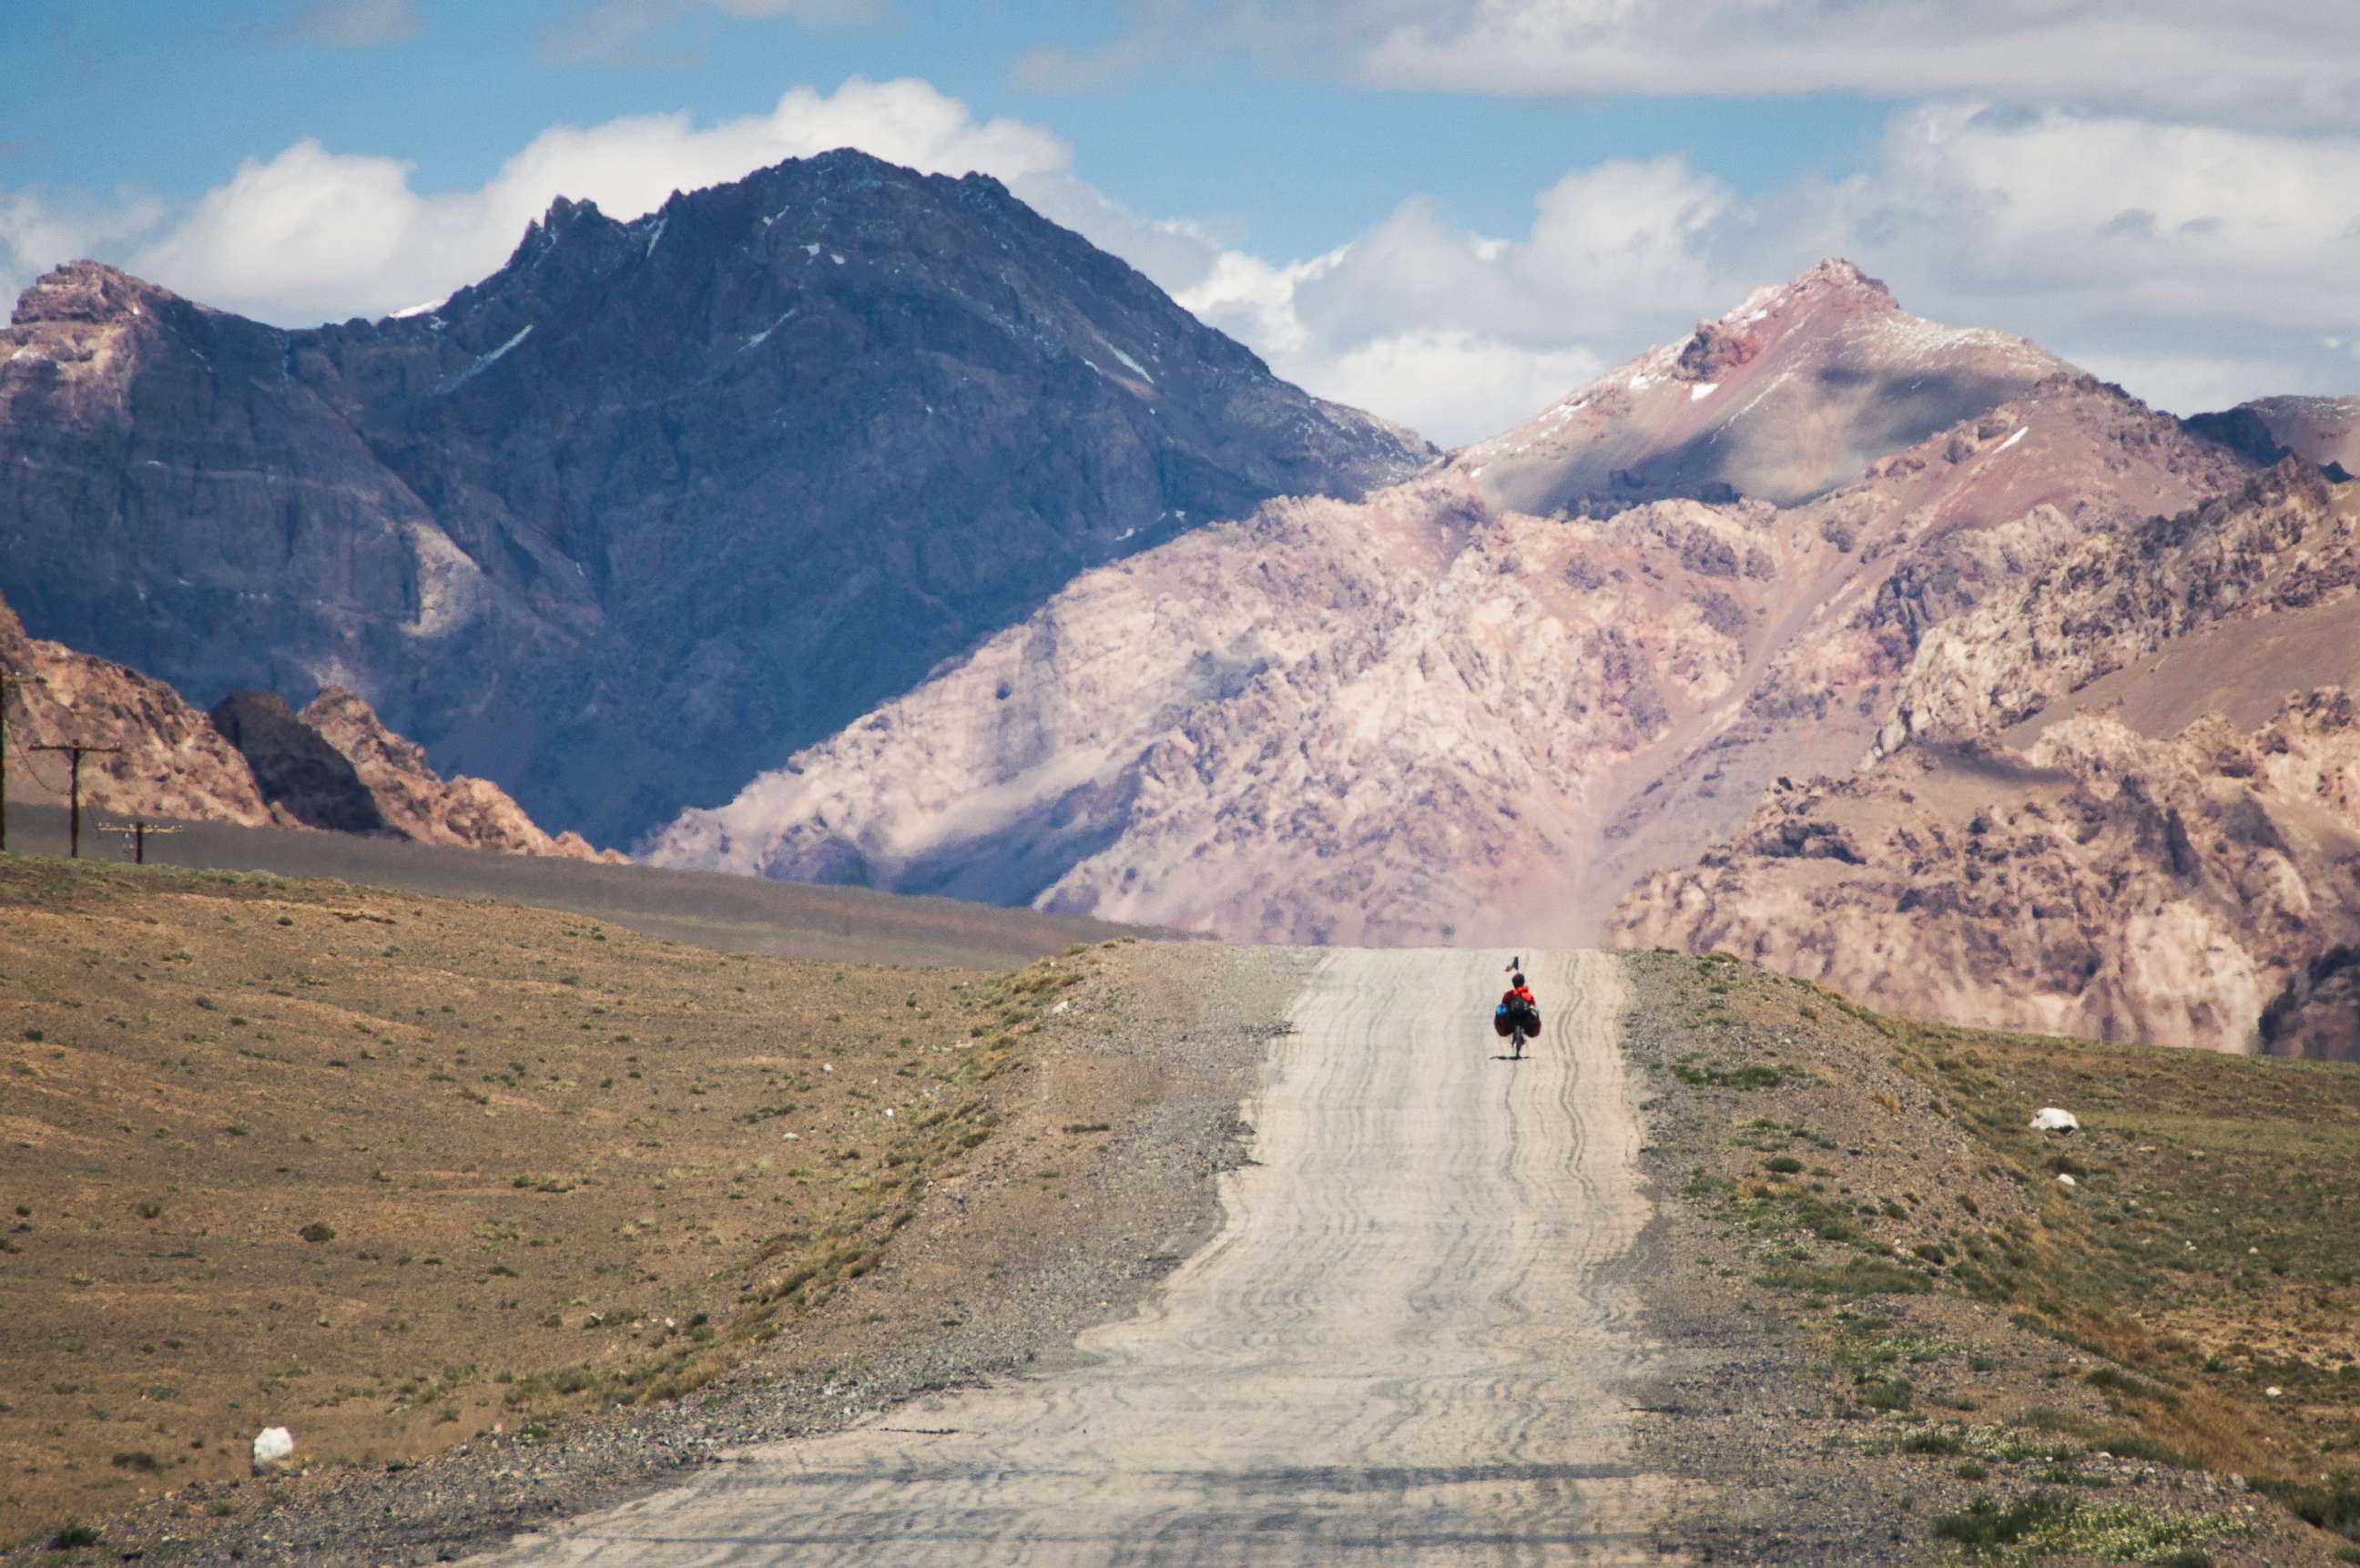 PHOTO: A traveler on the M41 road (also called Pamir highway), crossing the Pamir plateau in Tajikistan. 